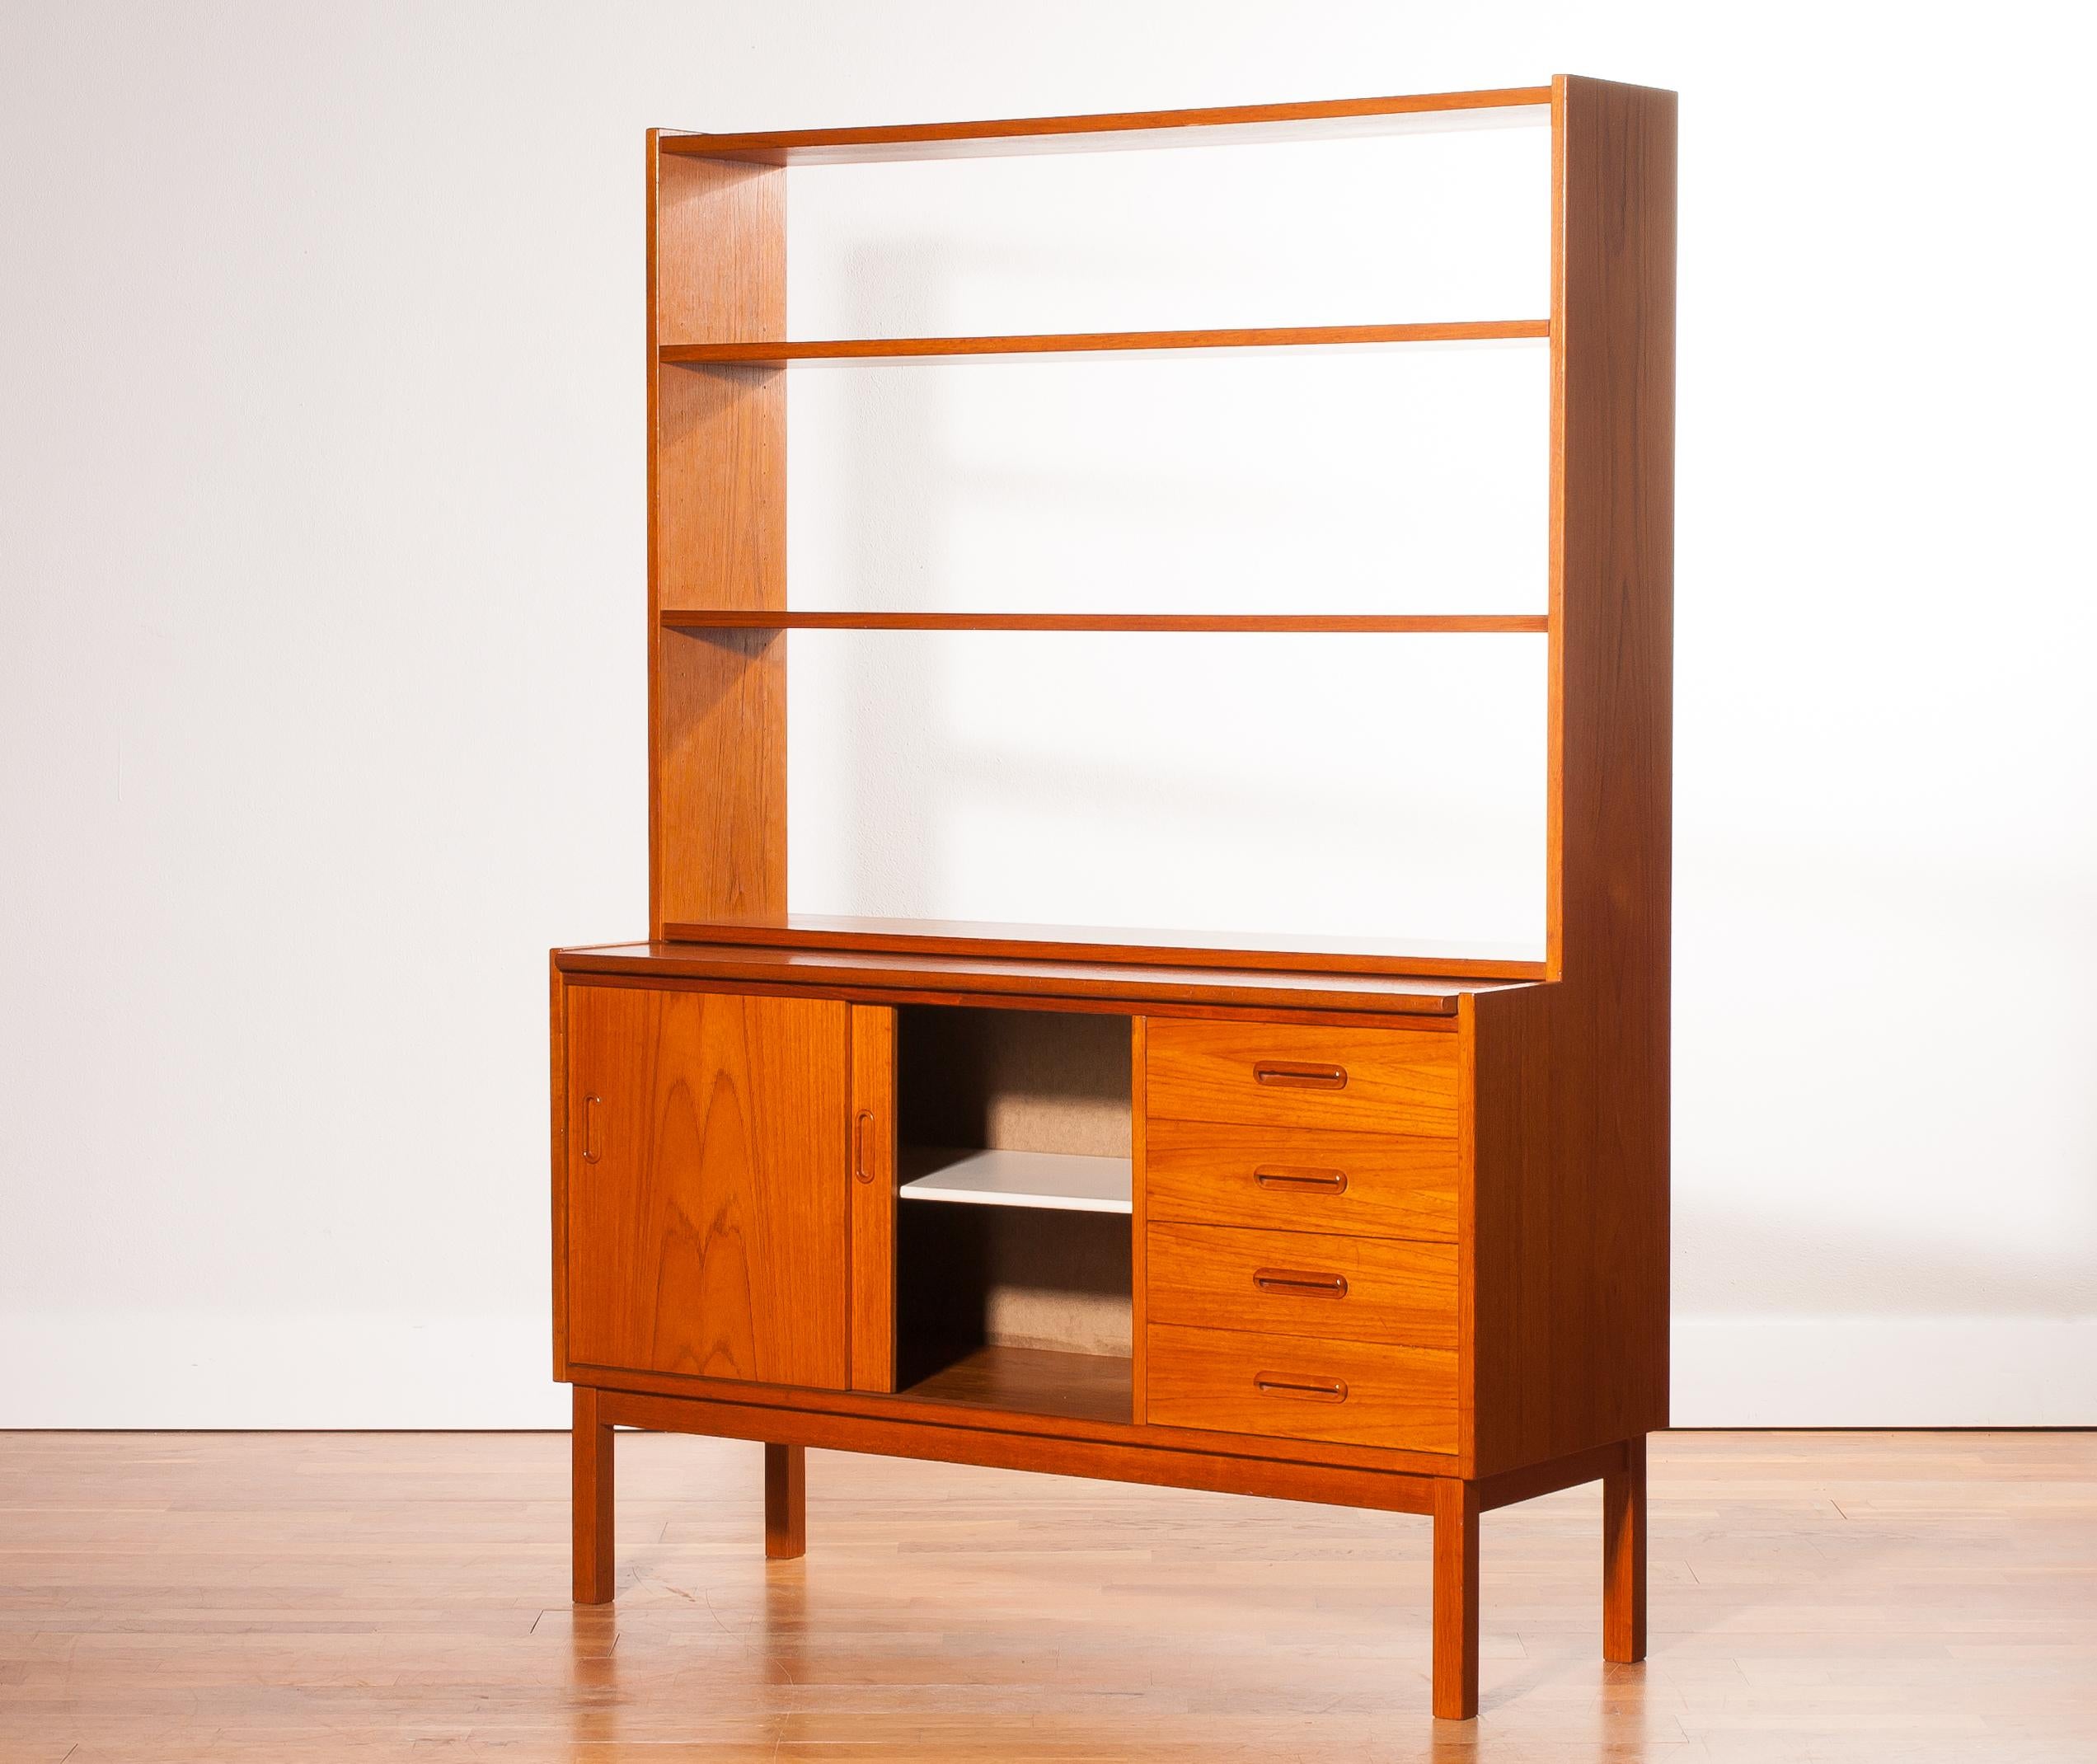 1960s, Teak Bookcase with Slid Able Writing or Working Space from Sweden 2